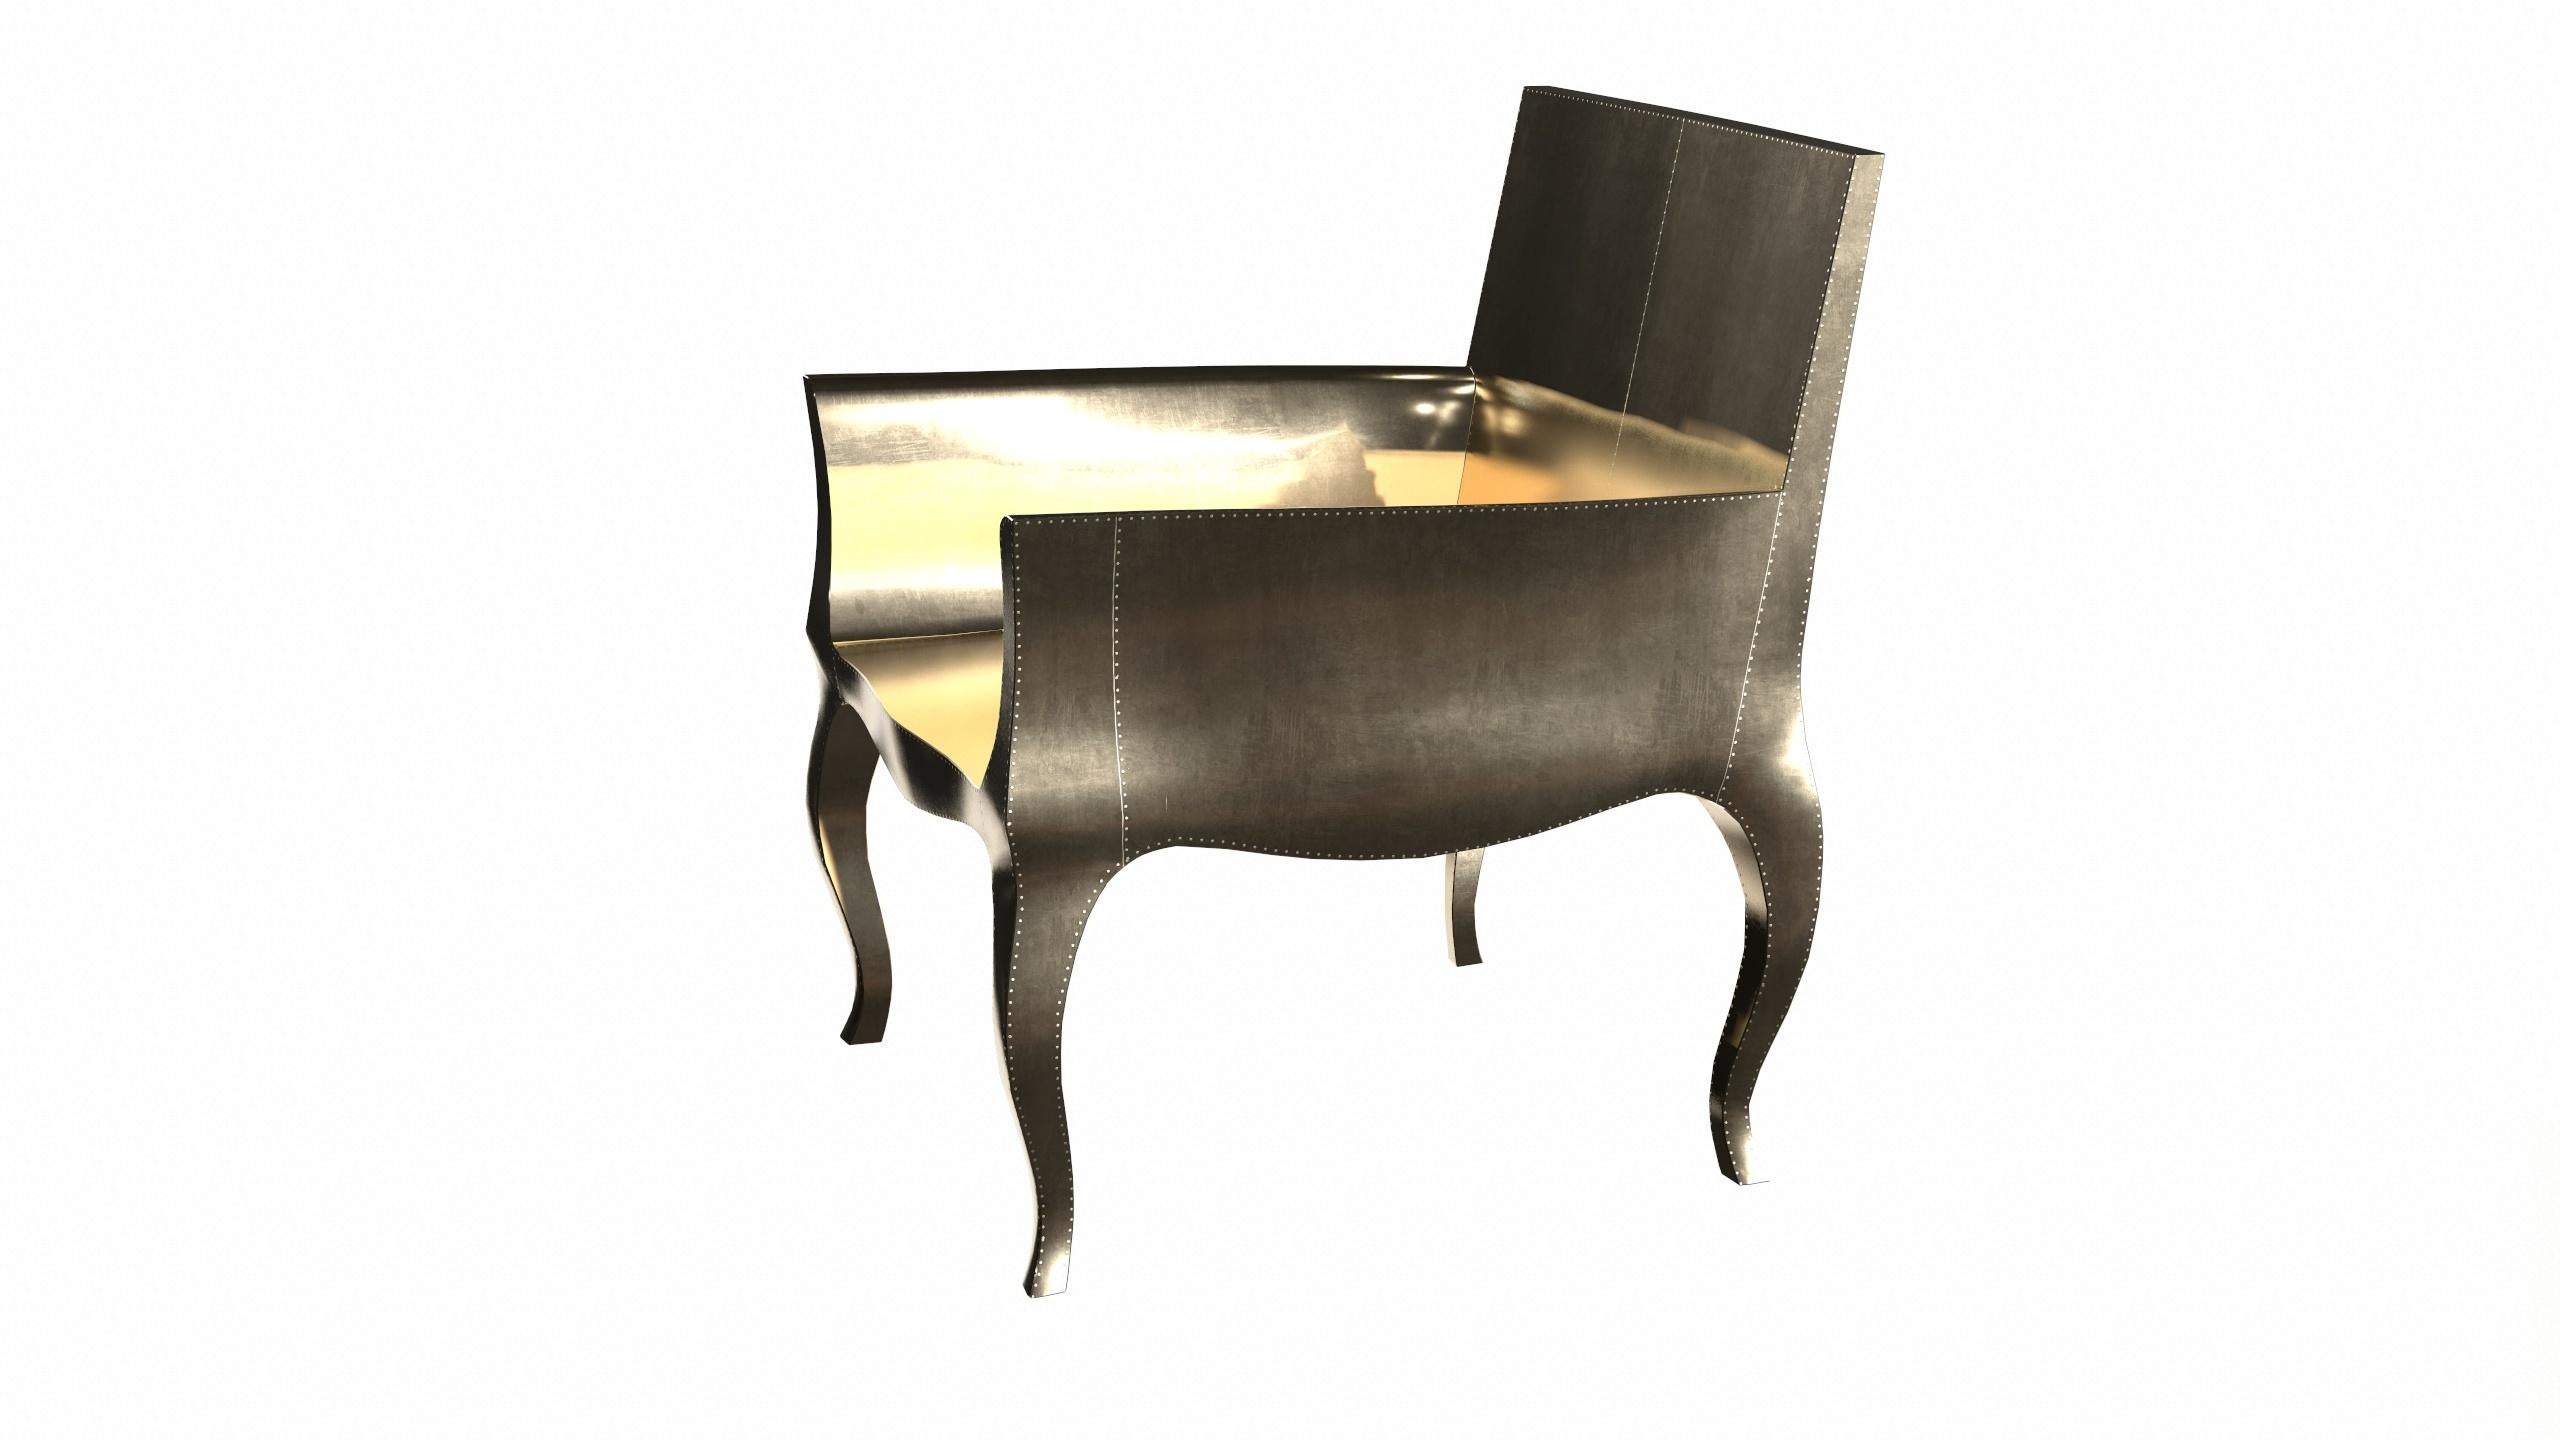 Hand-Carved Art Deco Club Chairs in Smooth Brass by Paul Mathieu for S. Odegard For Sale